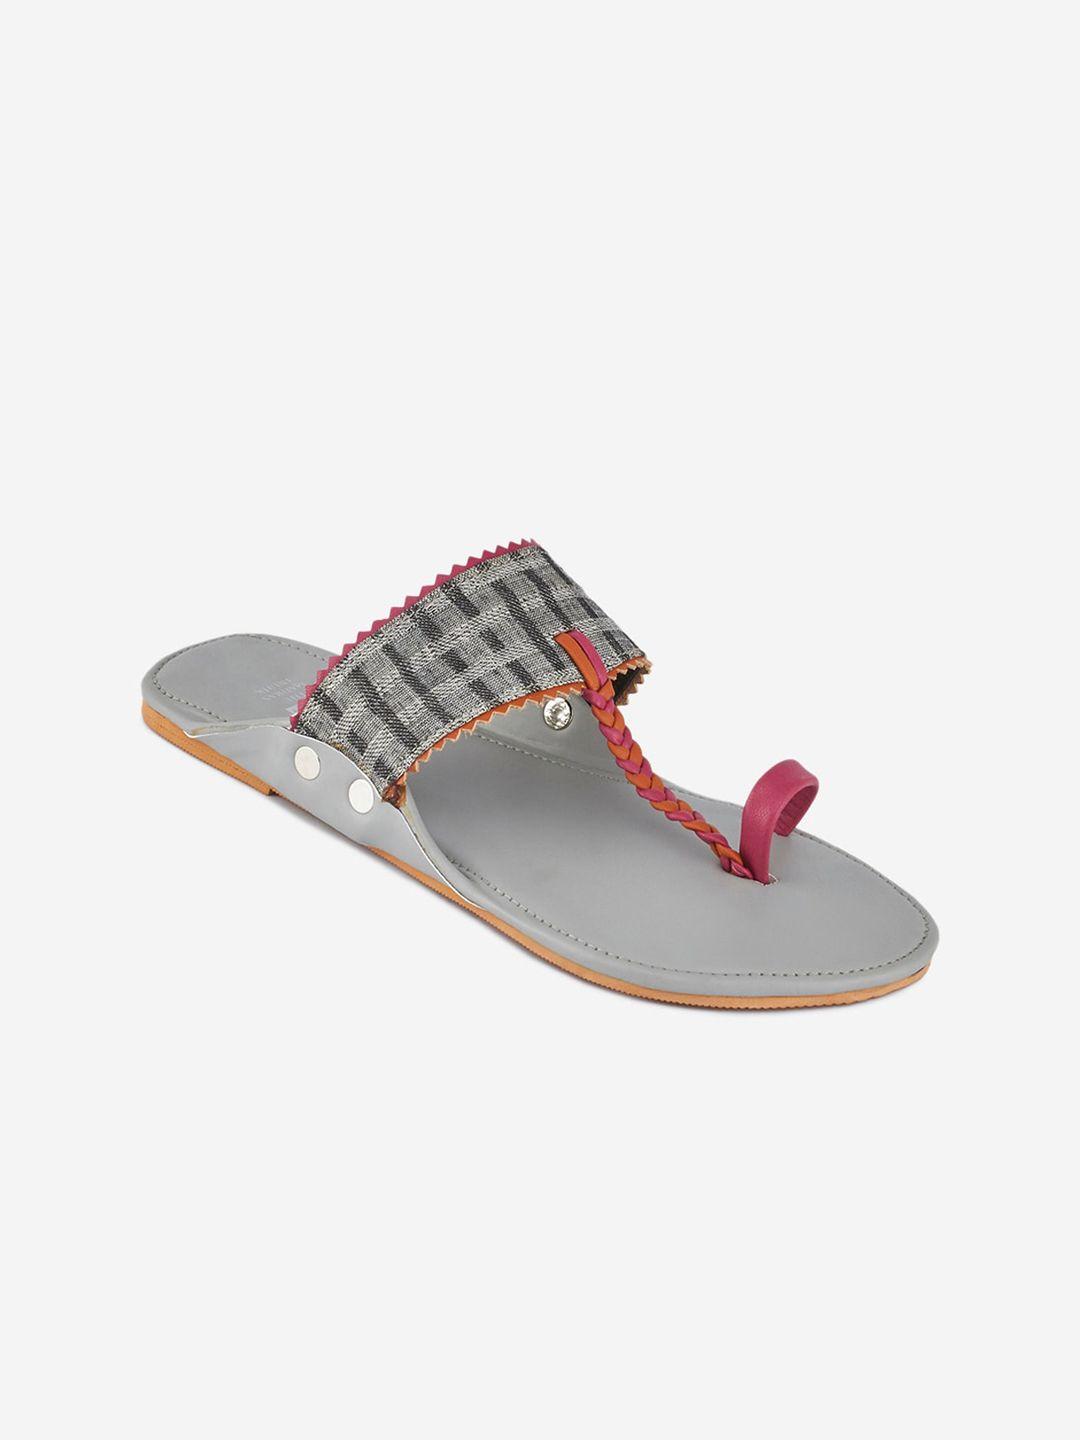 the madras trunk women grey printed one toe flats